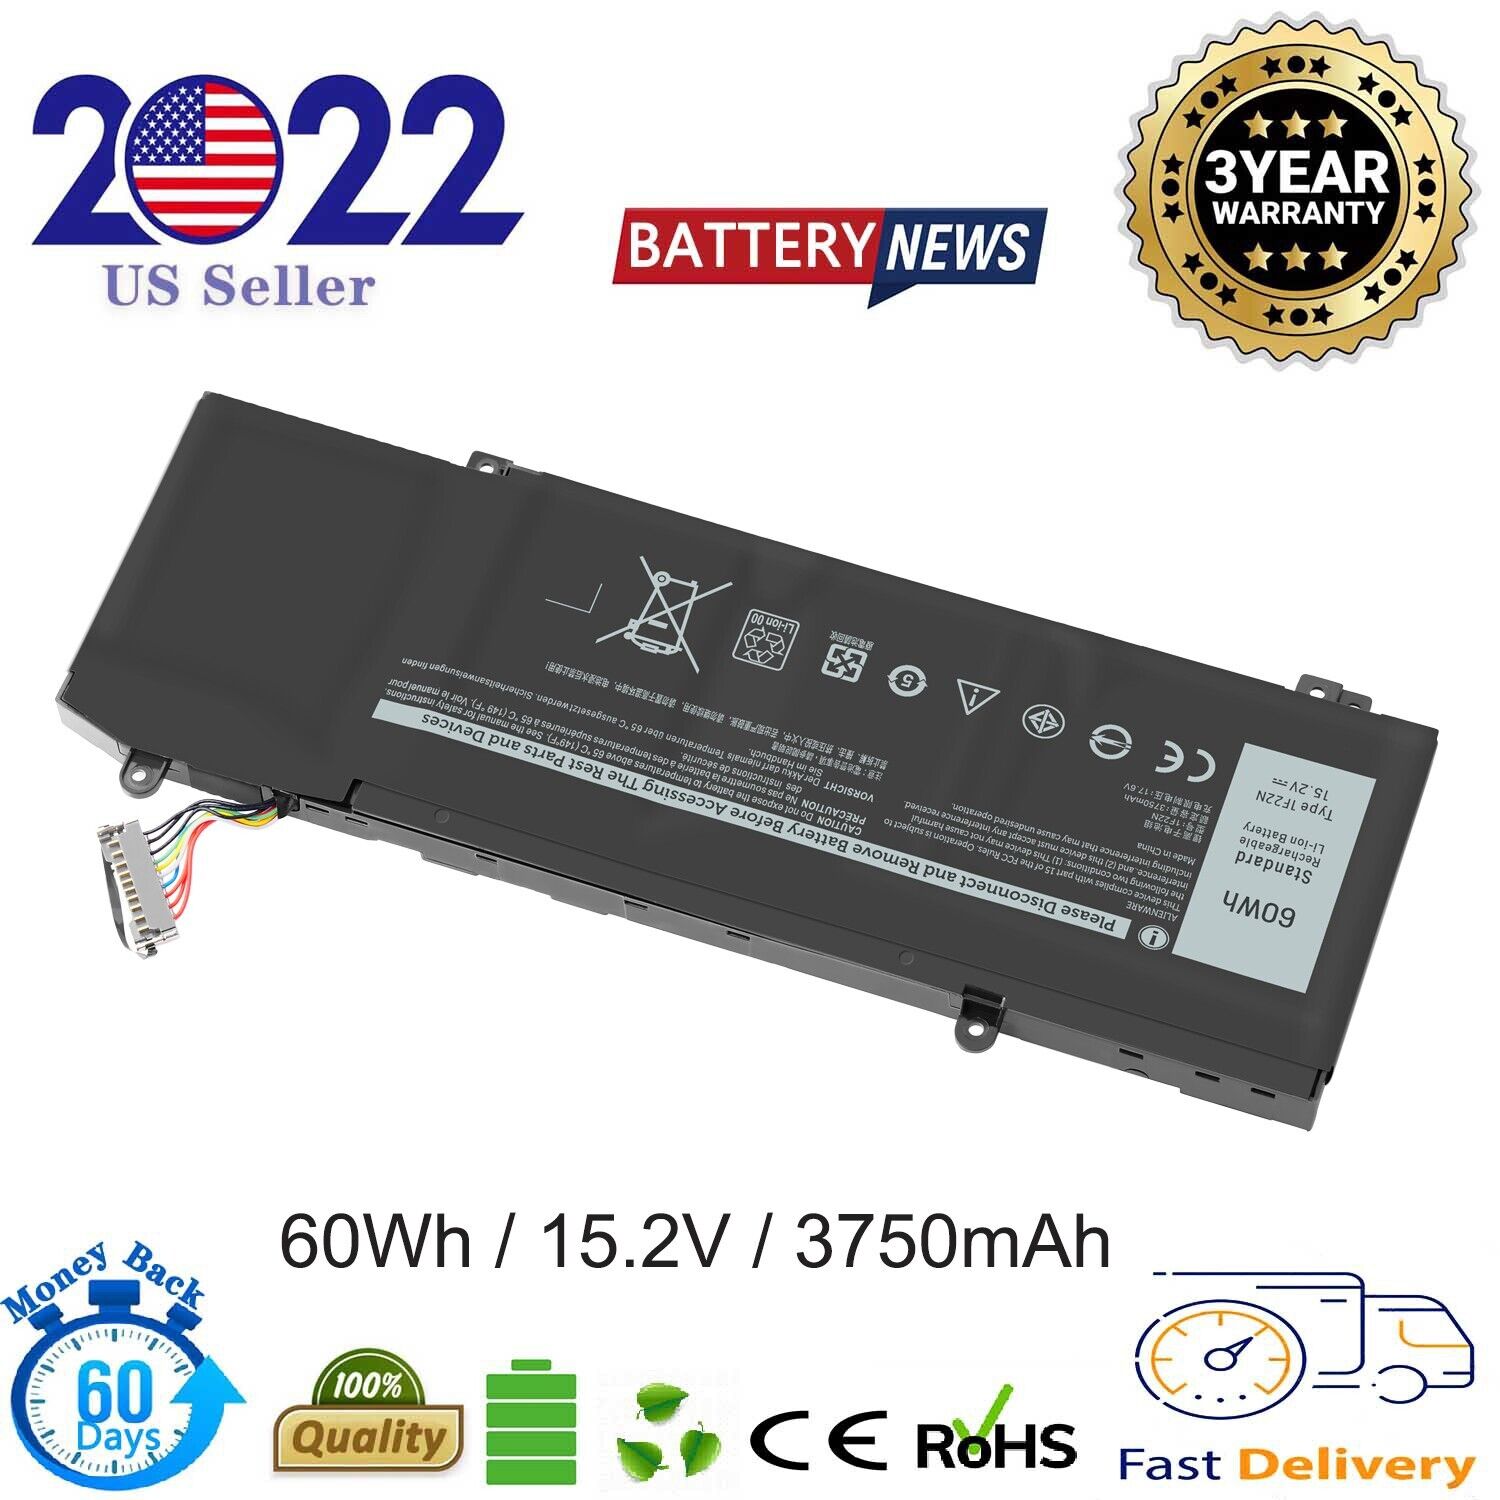 60Wh HYWXJ 1F22N Laptop Battery for Dell Alienware M15 M17 P79F P79F001 Series